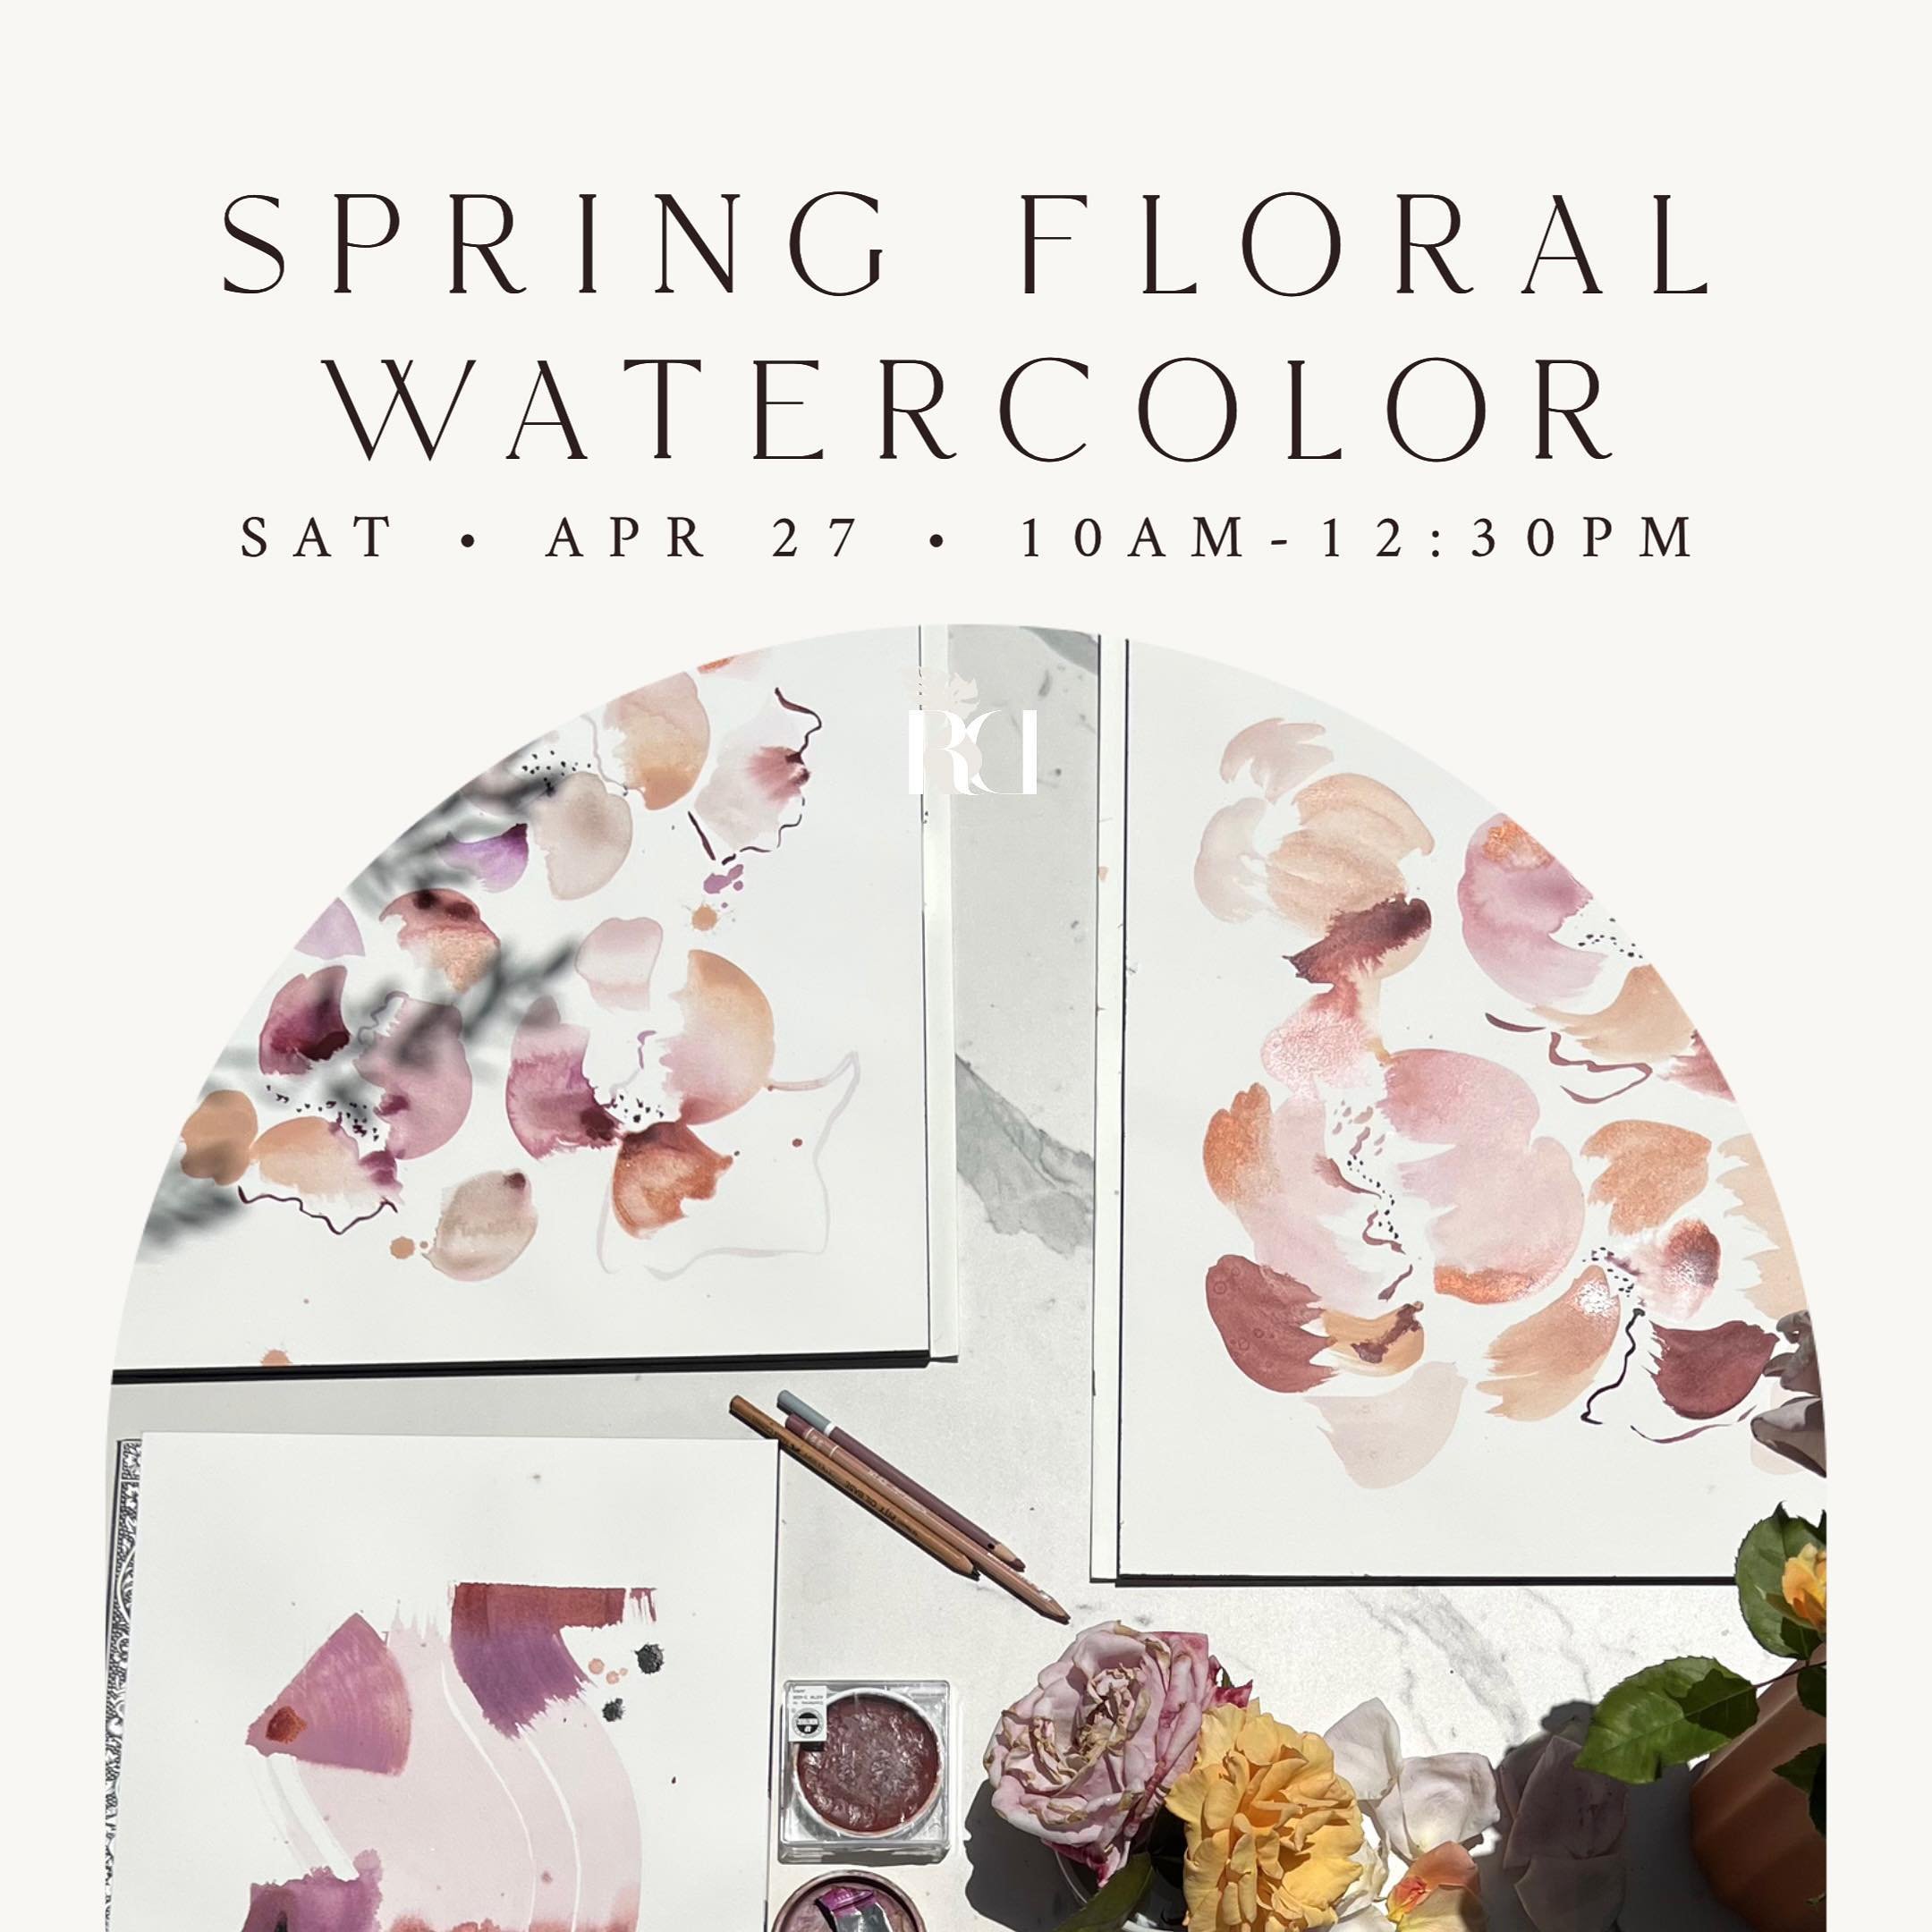 SPRING FLORAL WATERCOLOR

Saturday, April 27, 2024
10:00 AM - 12:30 PM
Los Feliz

Come paint flowers in our garden! The roses will be starting their first bloom of the season, and we will have a variety of arrangements and books from which to draw in